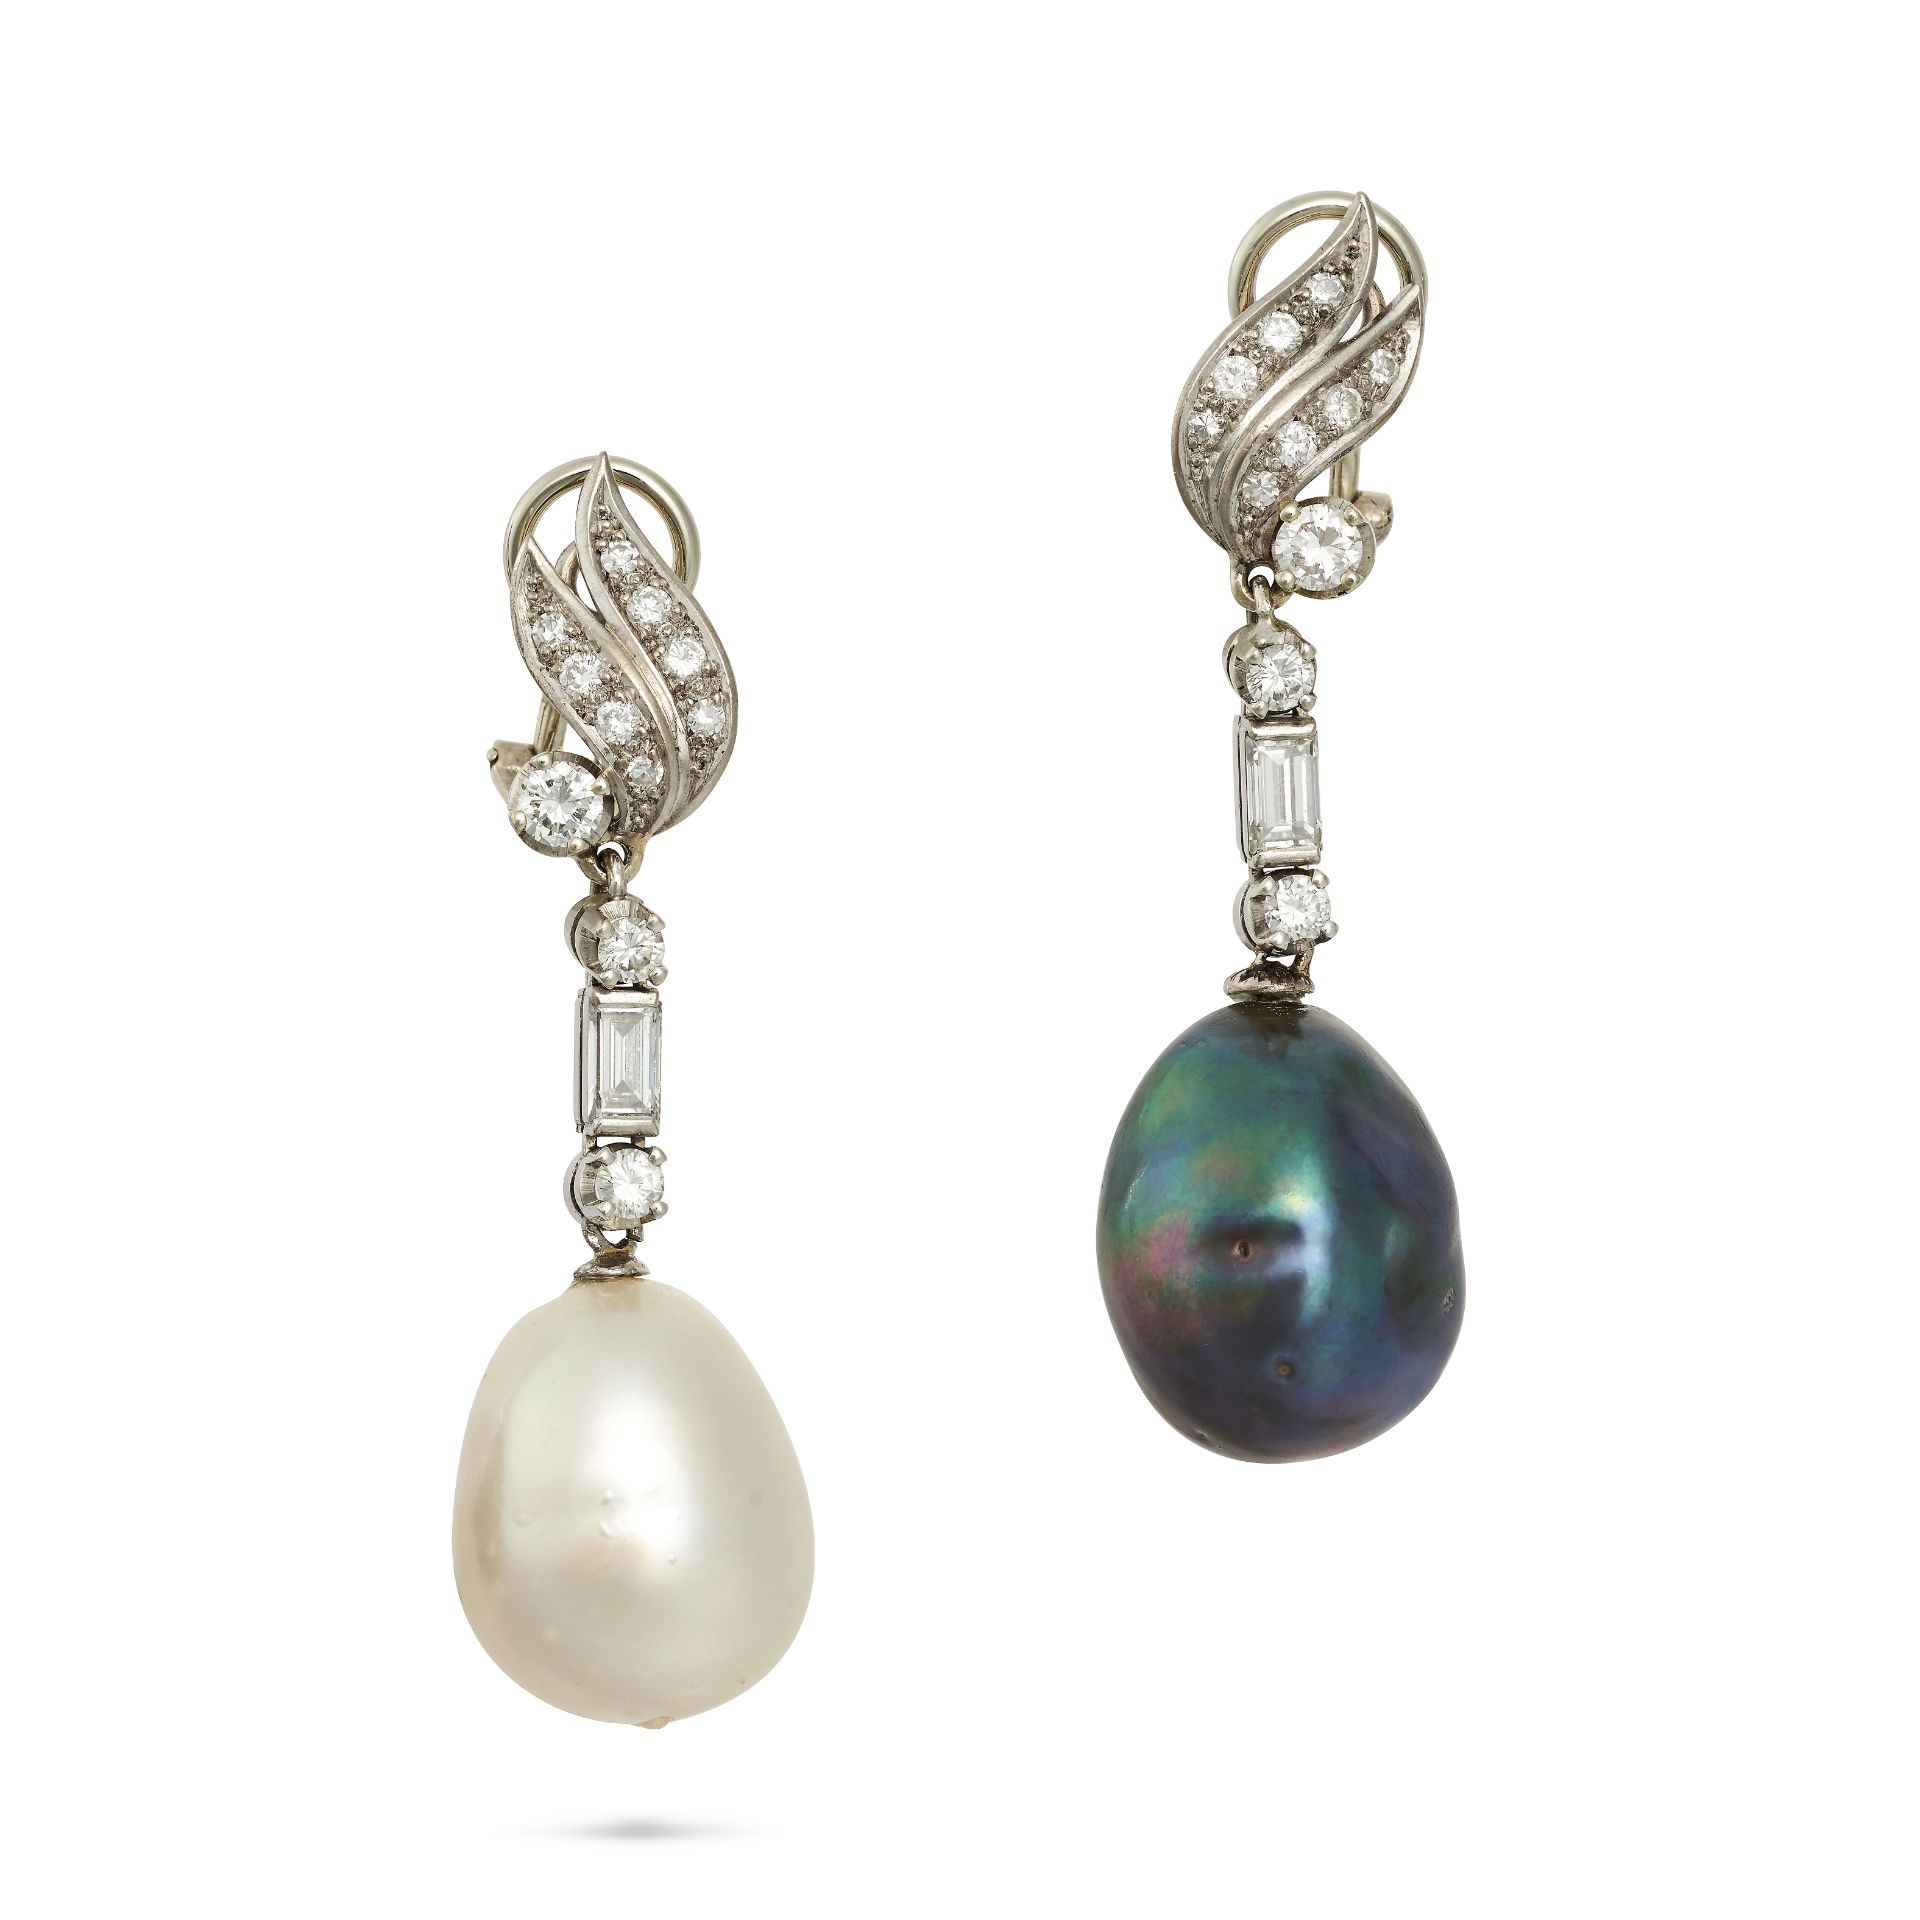 A PAIR OF DAY AND NIGHT PEARL AND DIAMOND DROP EARRINGS in 18ct white gold, set with round brilli...